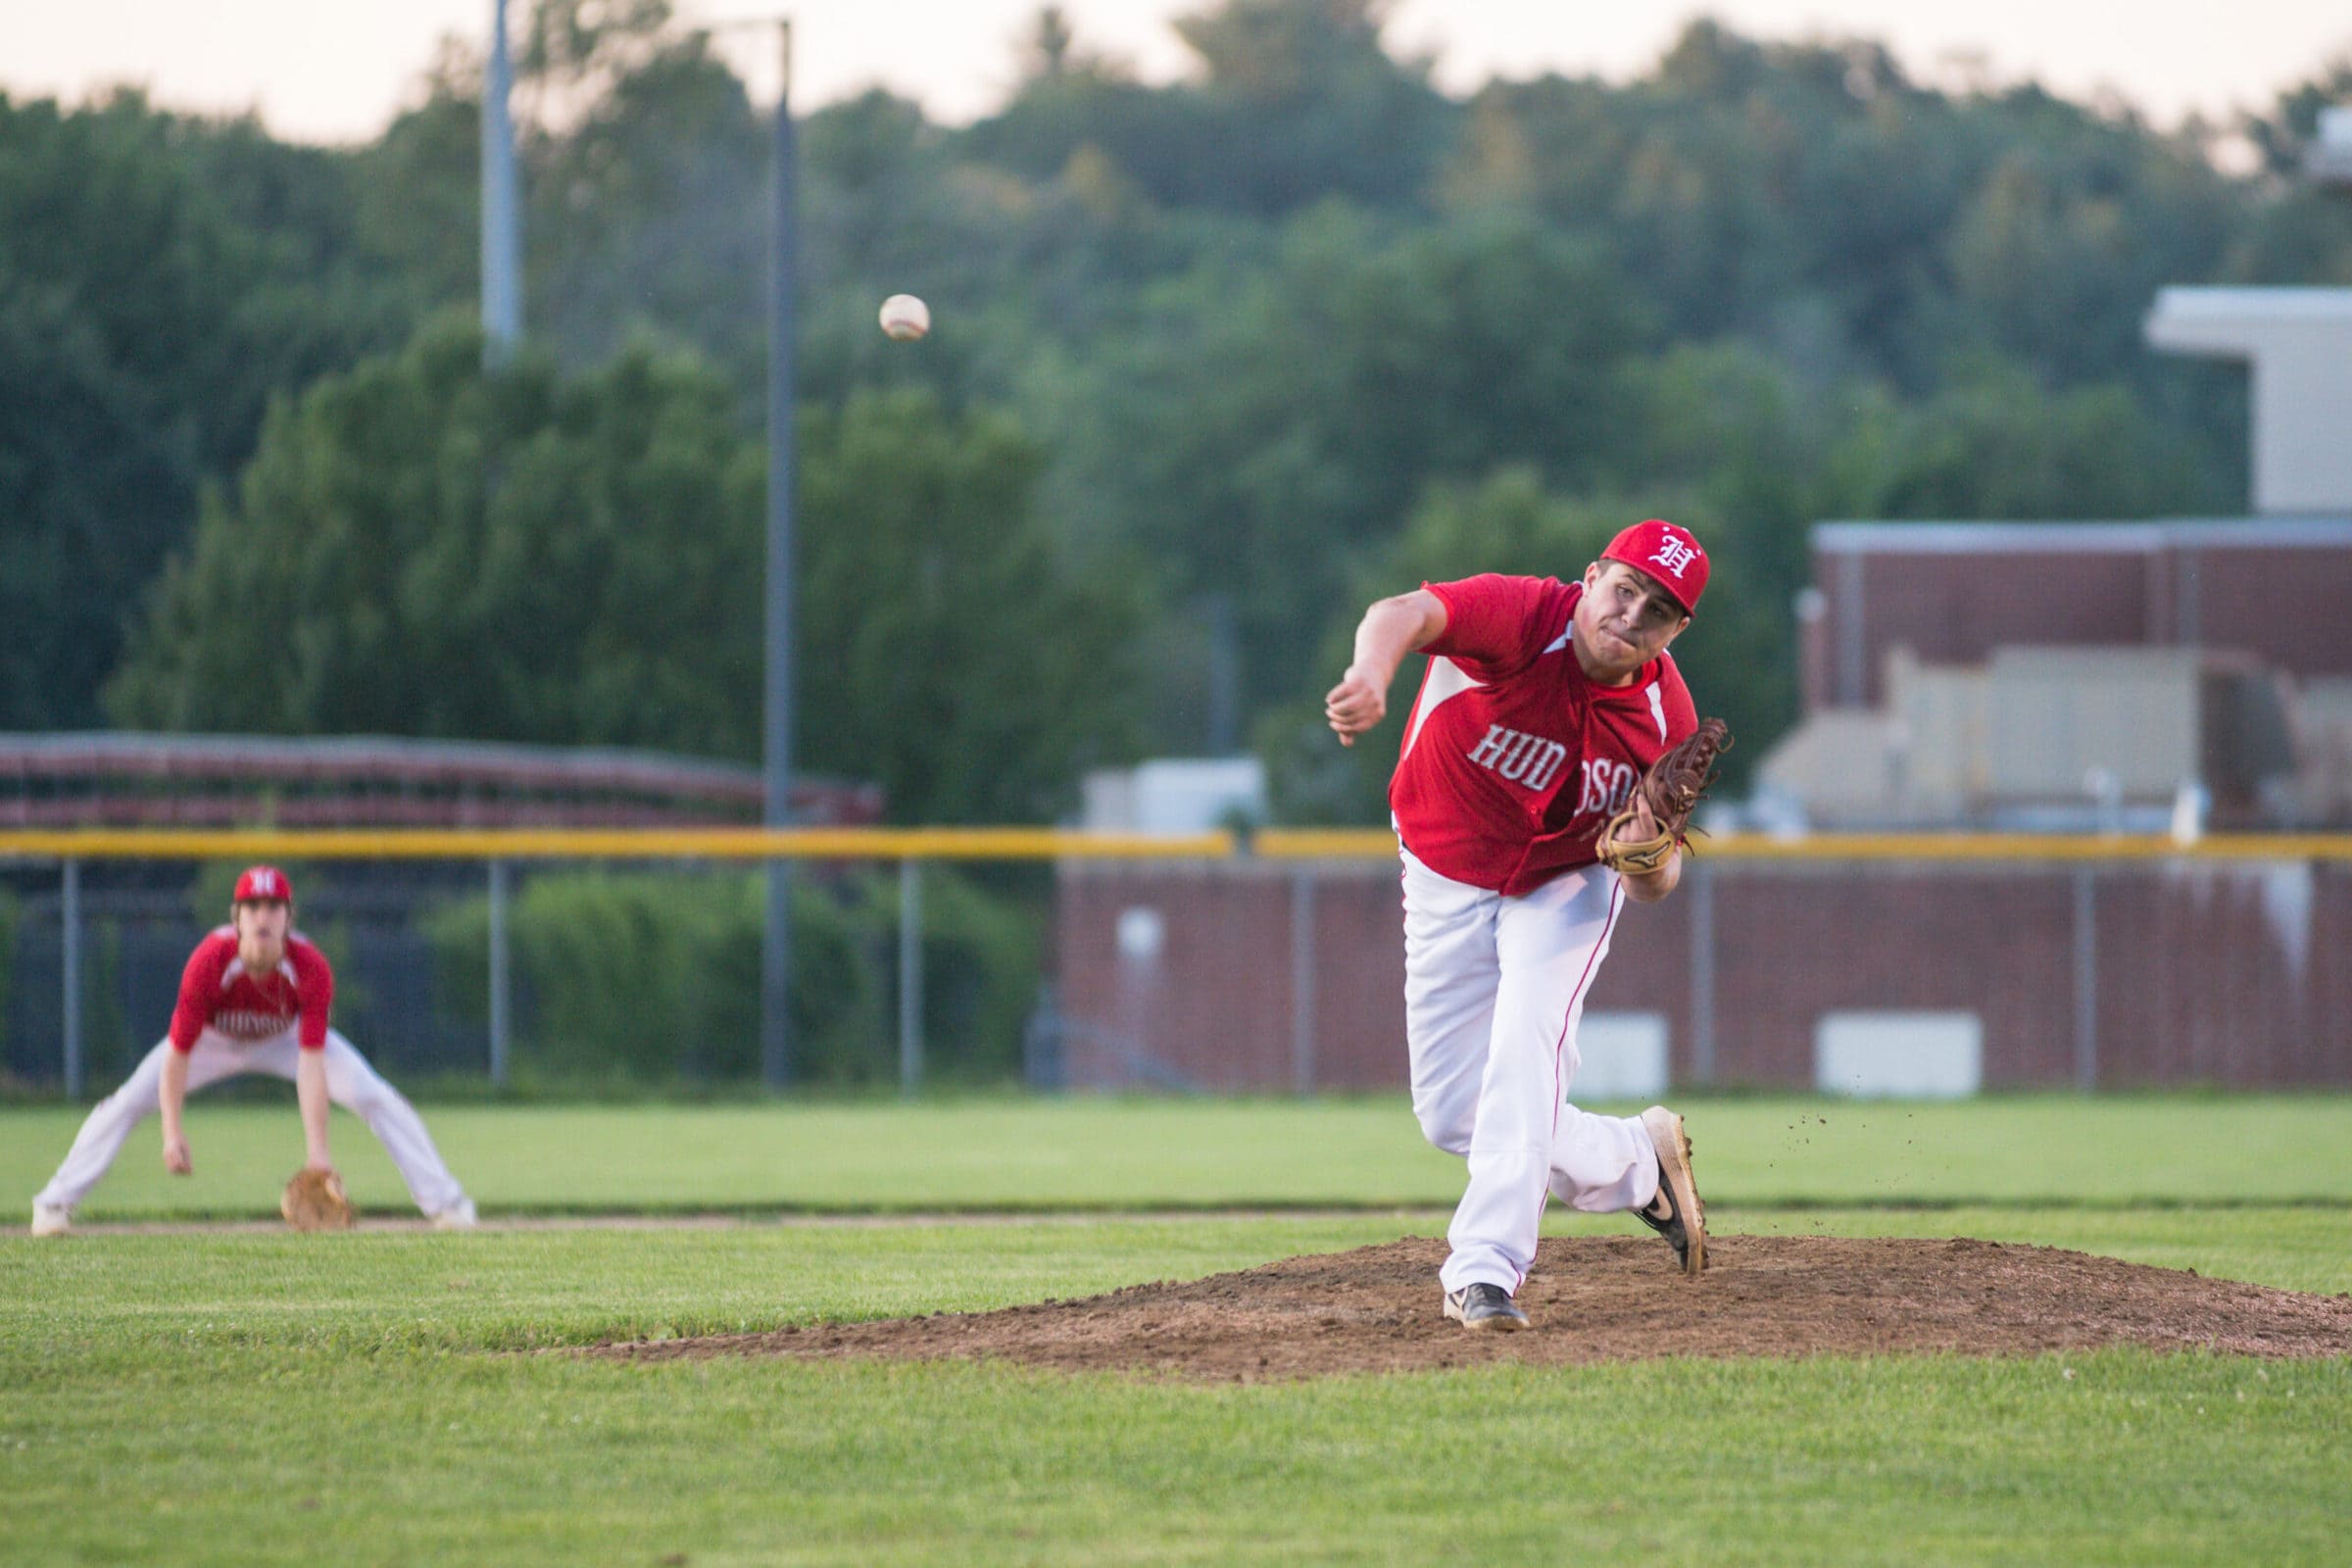 Hudson pitcher Justin Wolfe throws during his team’s July 28 game against Natick. Wolfe would pitch 7 ⅔ innings before being pulled due to pitch count rules.